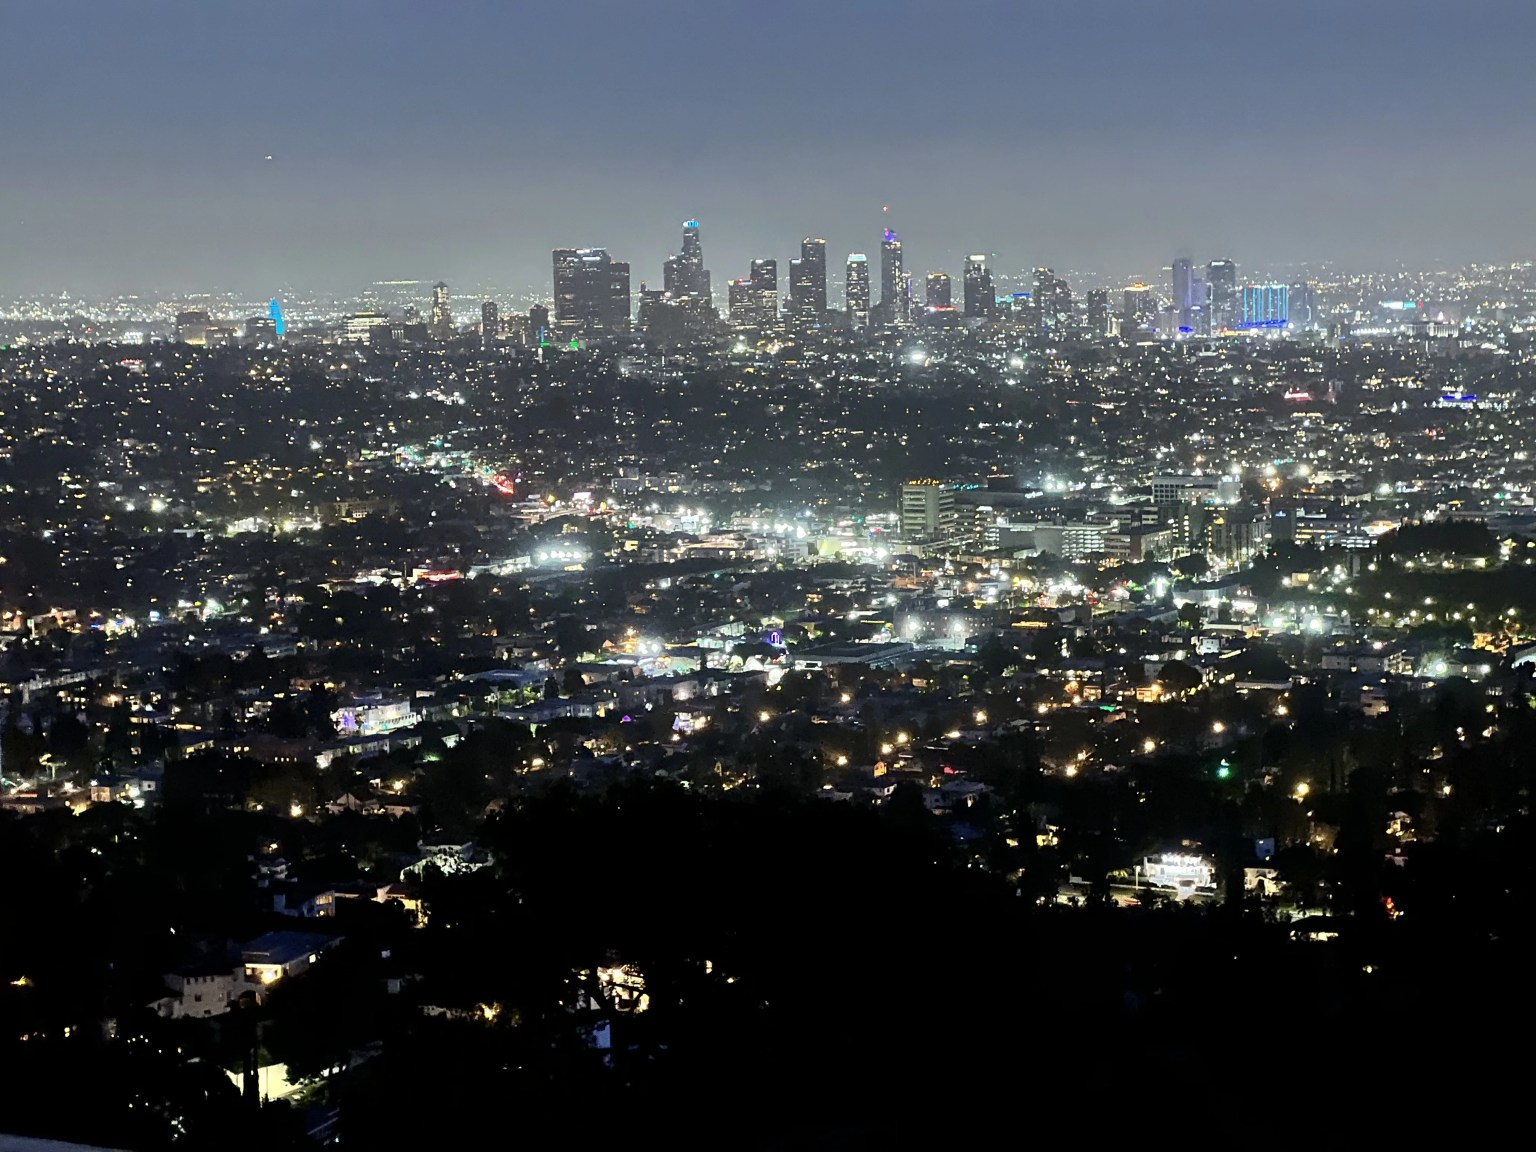 An late evening image of Los Angeles showcasing the many lights around the area